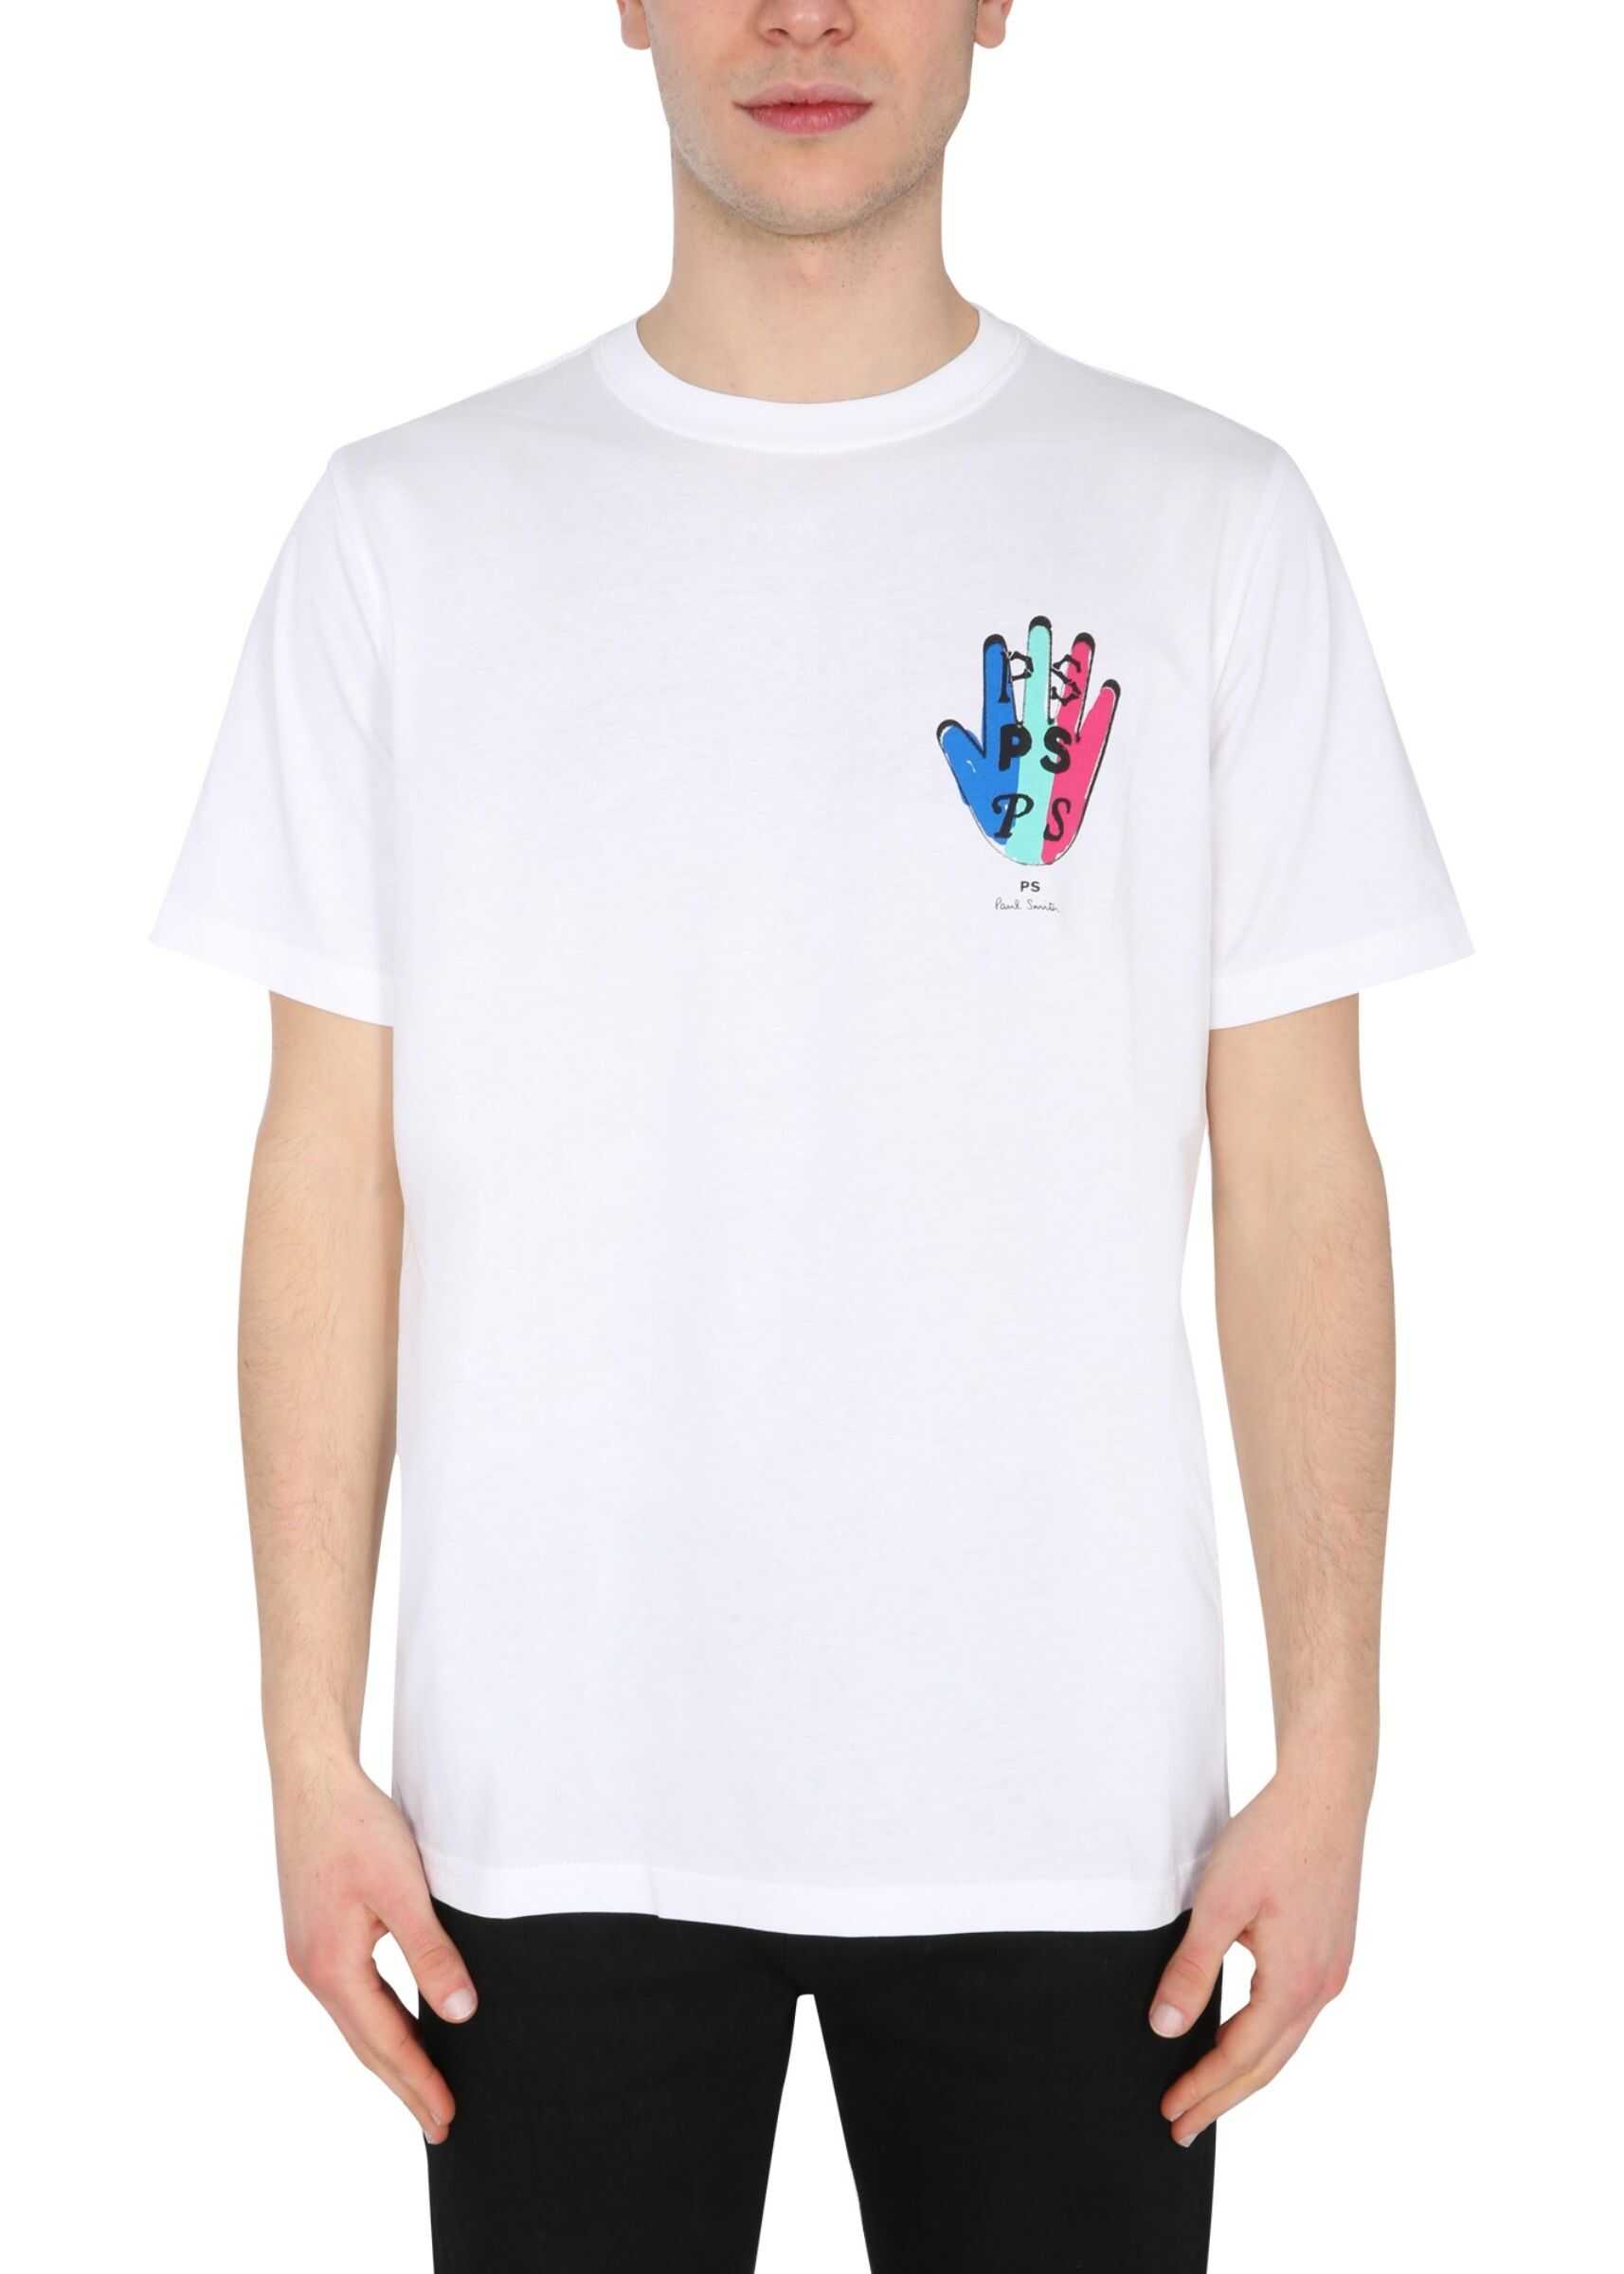 PS by Paul Smith Crew Neck T-Shirt M2R/011R/FP2609_01 WHITE